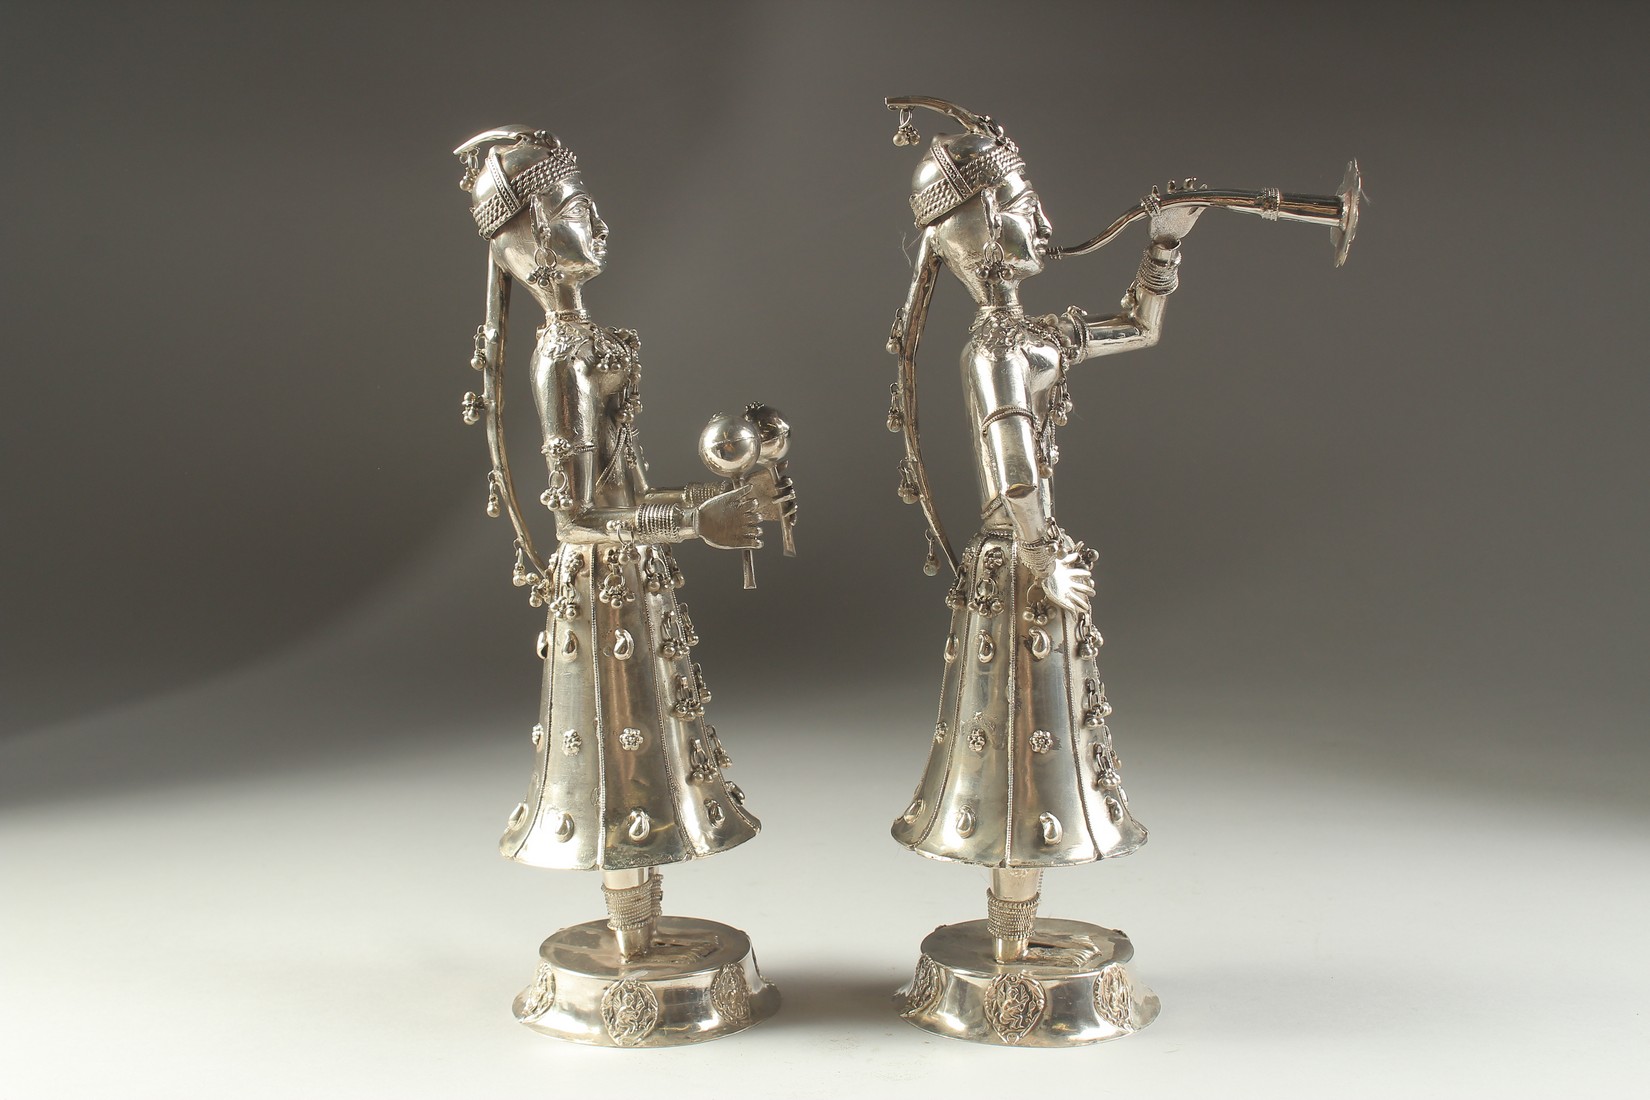 A FINE PAIR OF 19TH CENTURY INDIAN SILVER FIGURES OF MUSICIANS, 30cm high. - Image 8 of 11